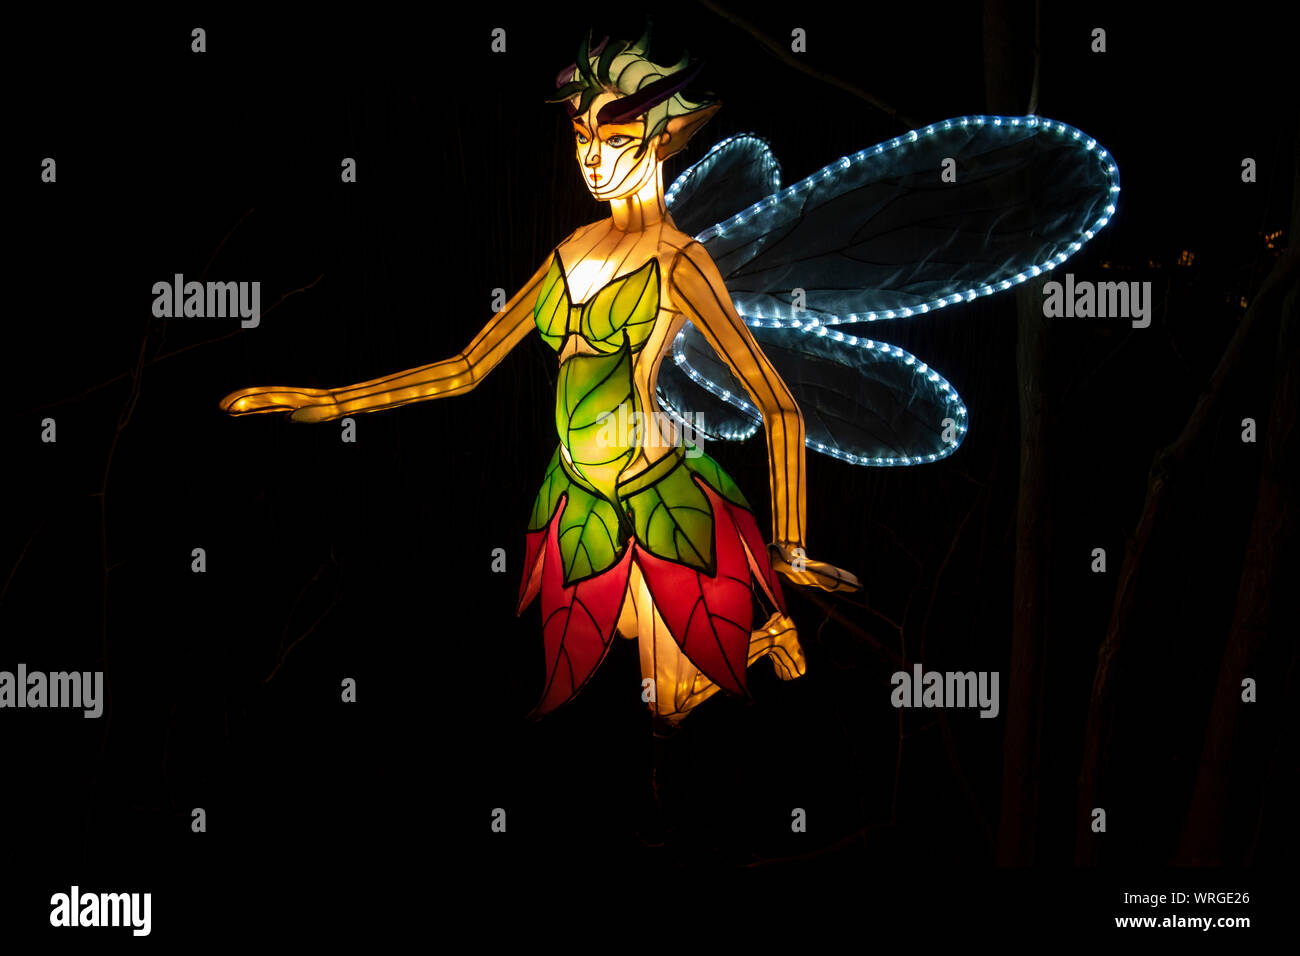 Mythical fairy, part of the Giant Lanterns of China, Myths and Legends display at Edinburgh Zoo, Scotland, UK Stock Photo